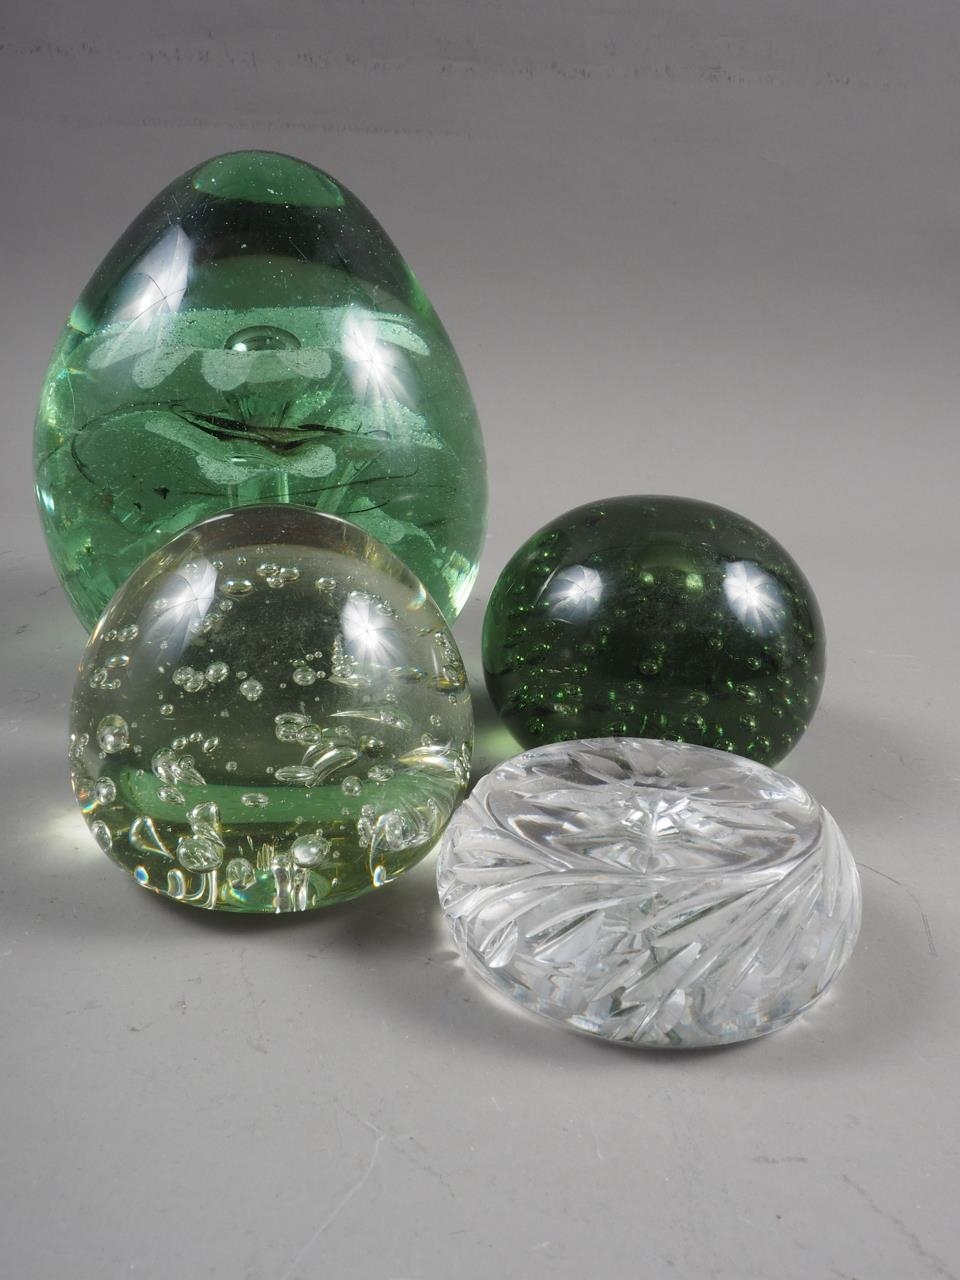 A 19th century glass door stop, two bubble glass paperweights and a cut glass paperweight